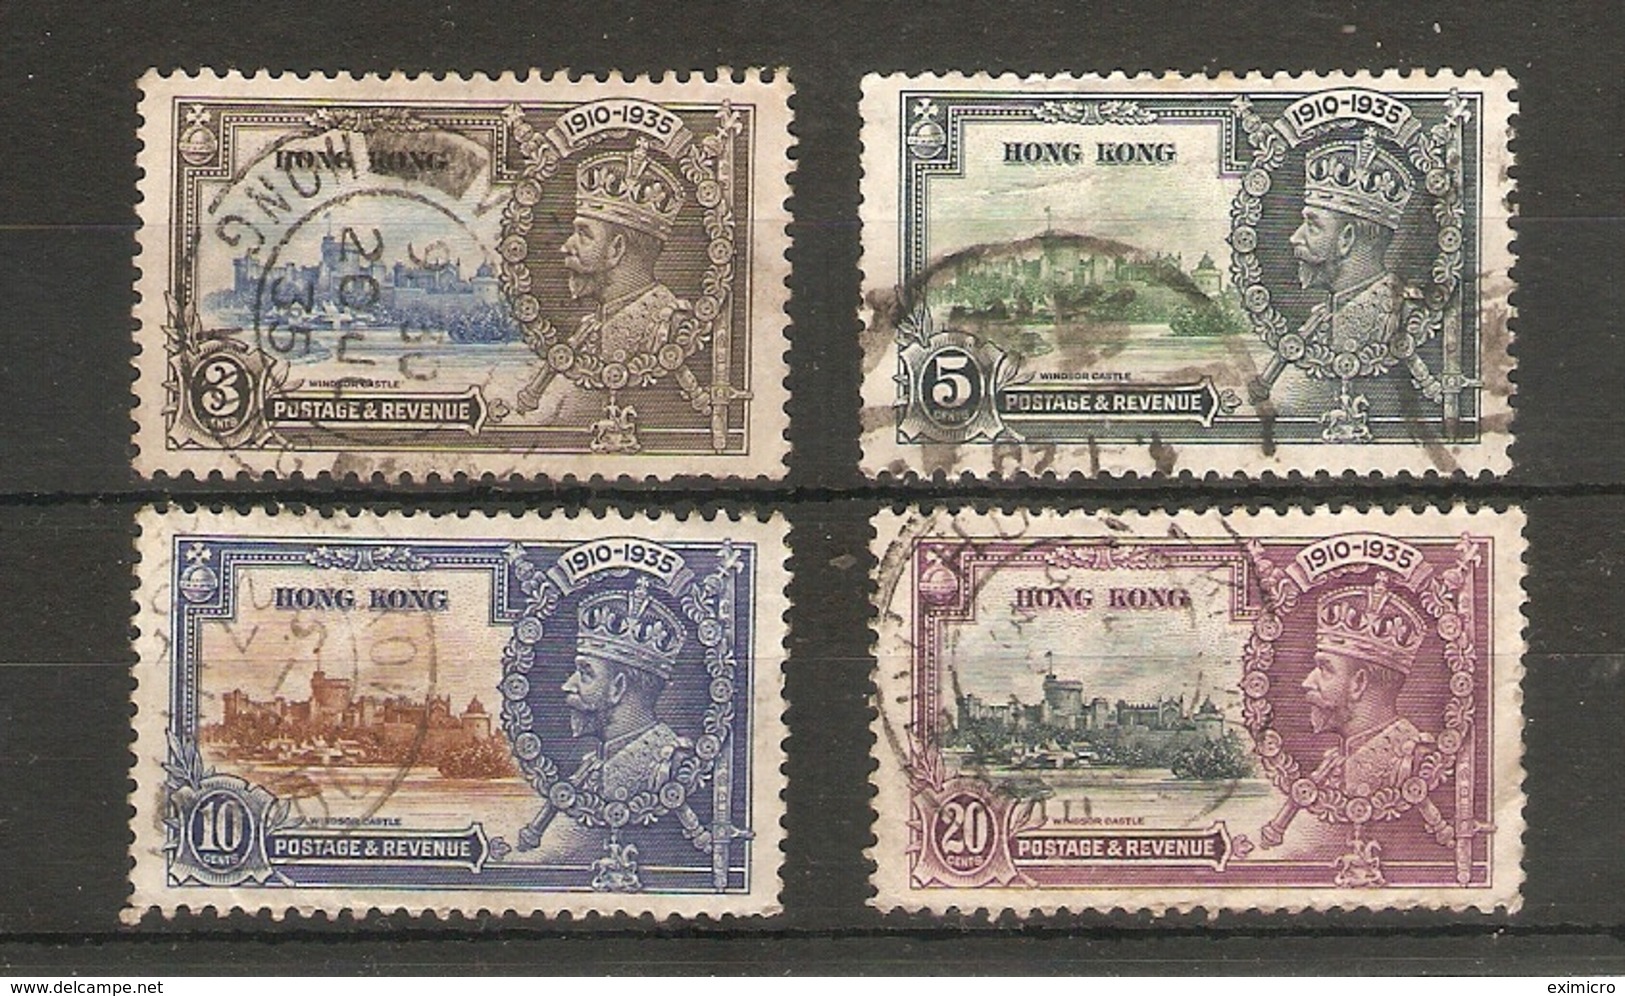 HONG KONG 1935 SILVER JUBILEE SET FINE USED Cat £18 - Used Stamps